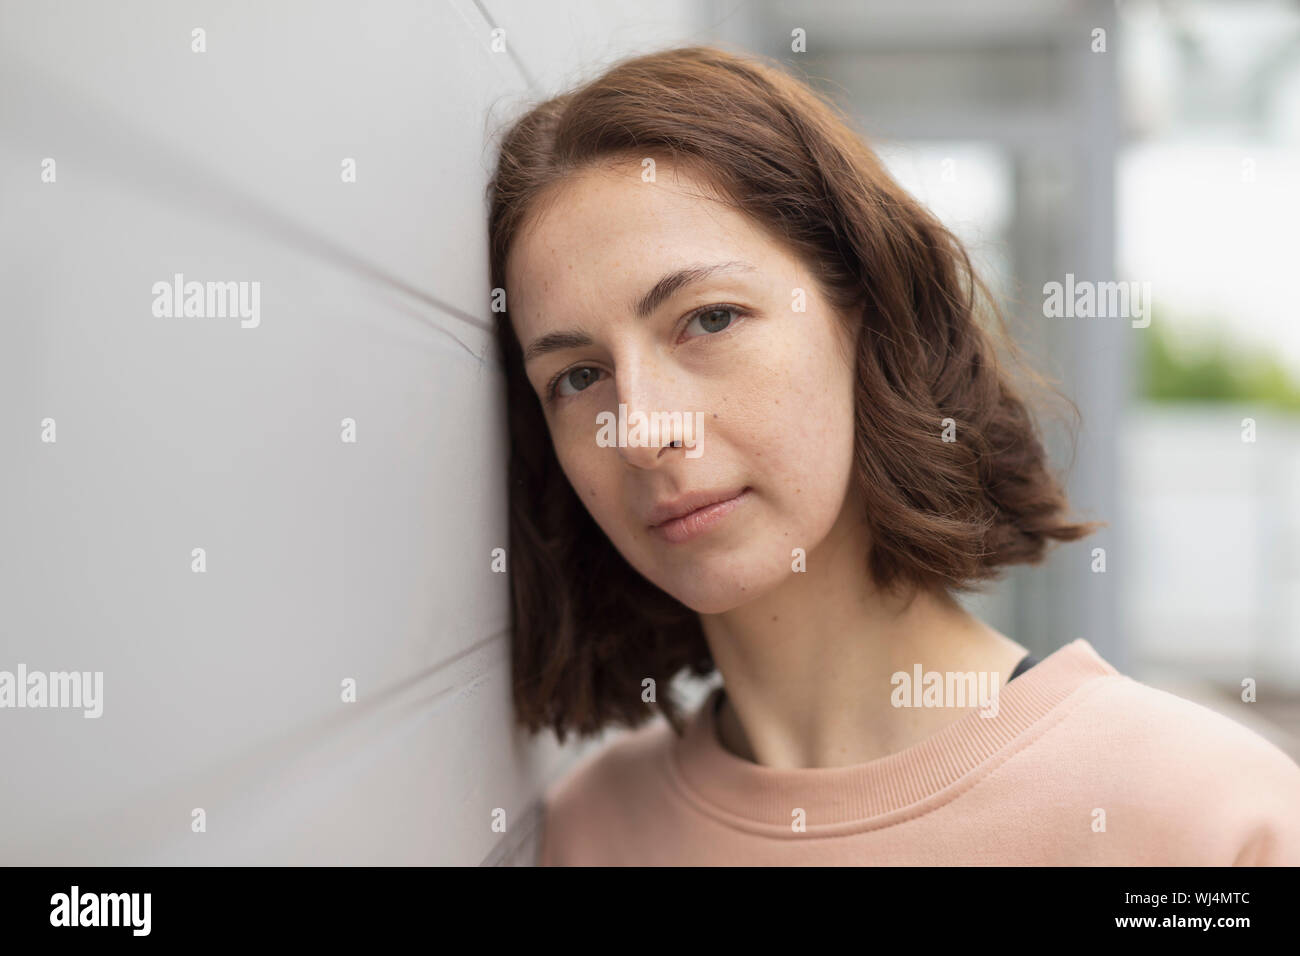 Portrait serene woman leaning against wall Stock Photo